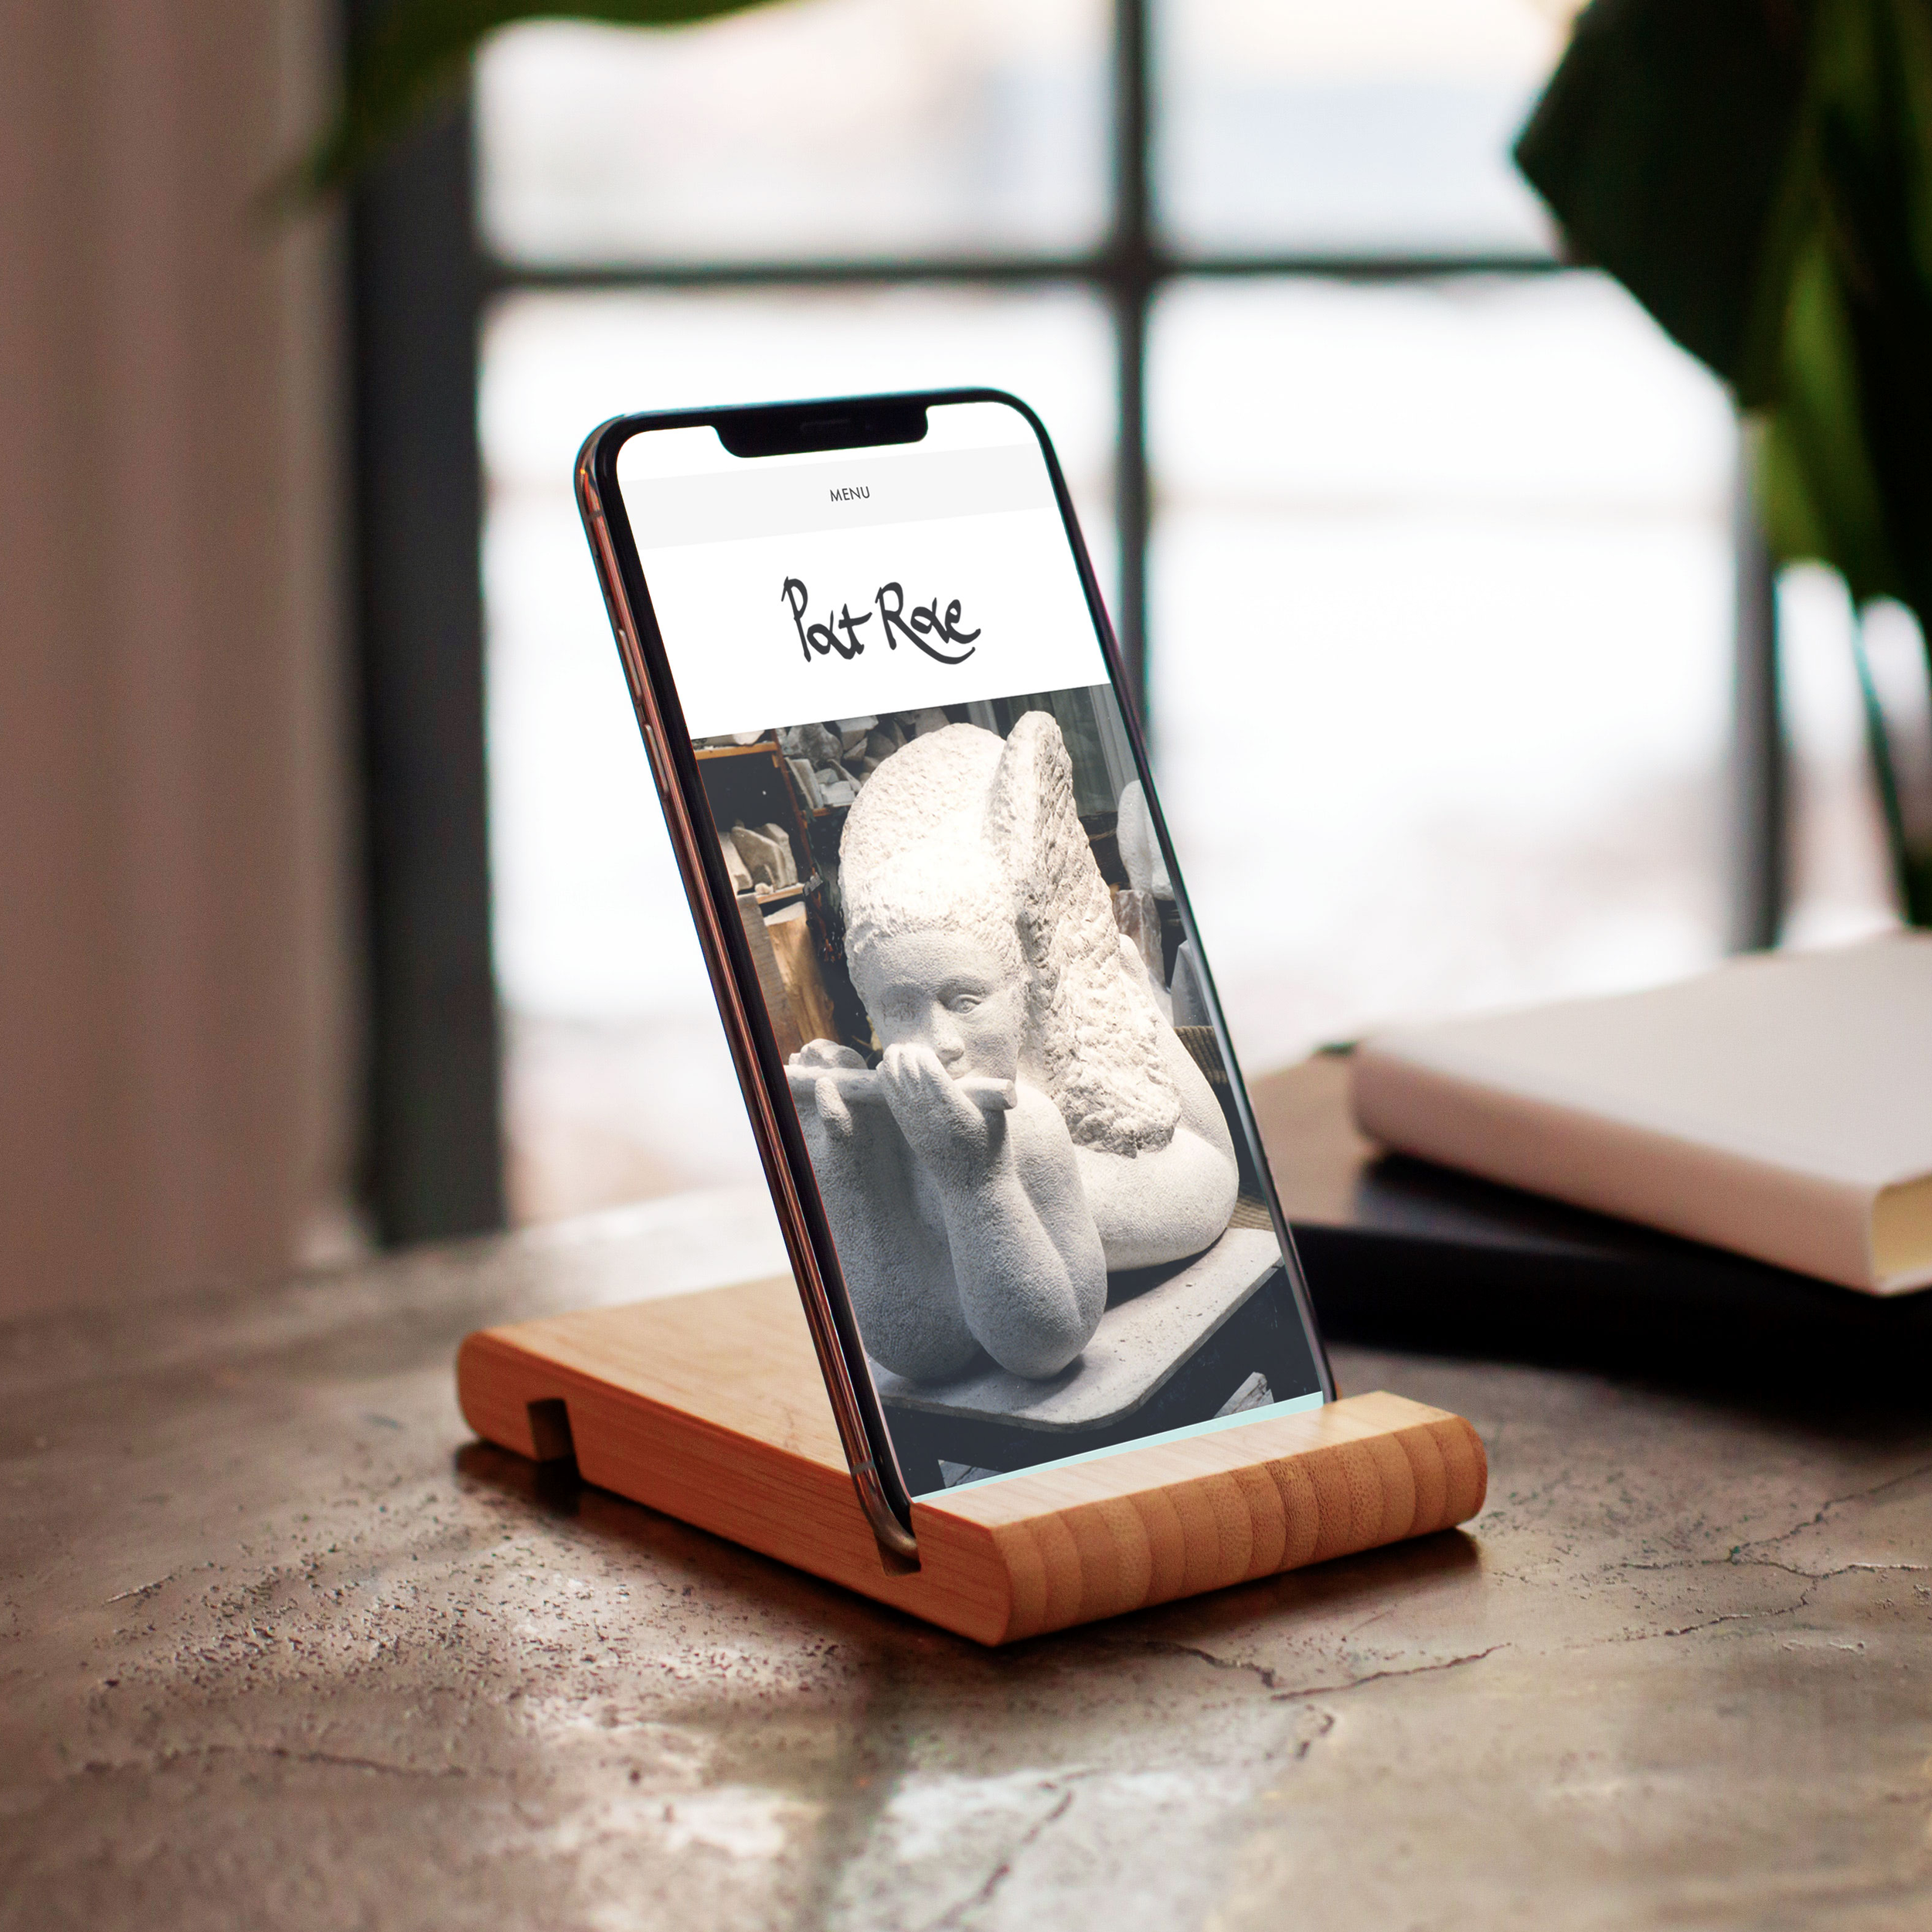 iPhone on a table showing artist and sculptor Pat Rae's logo and website with a window and plant in background designed by Yeswaydesign